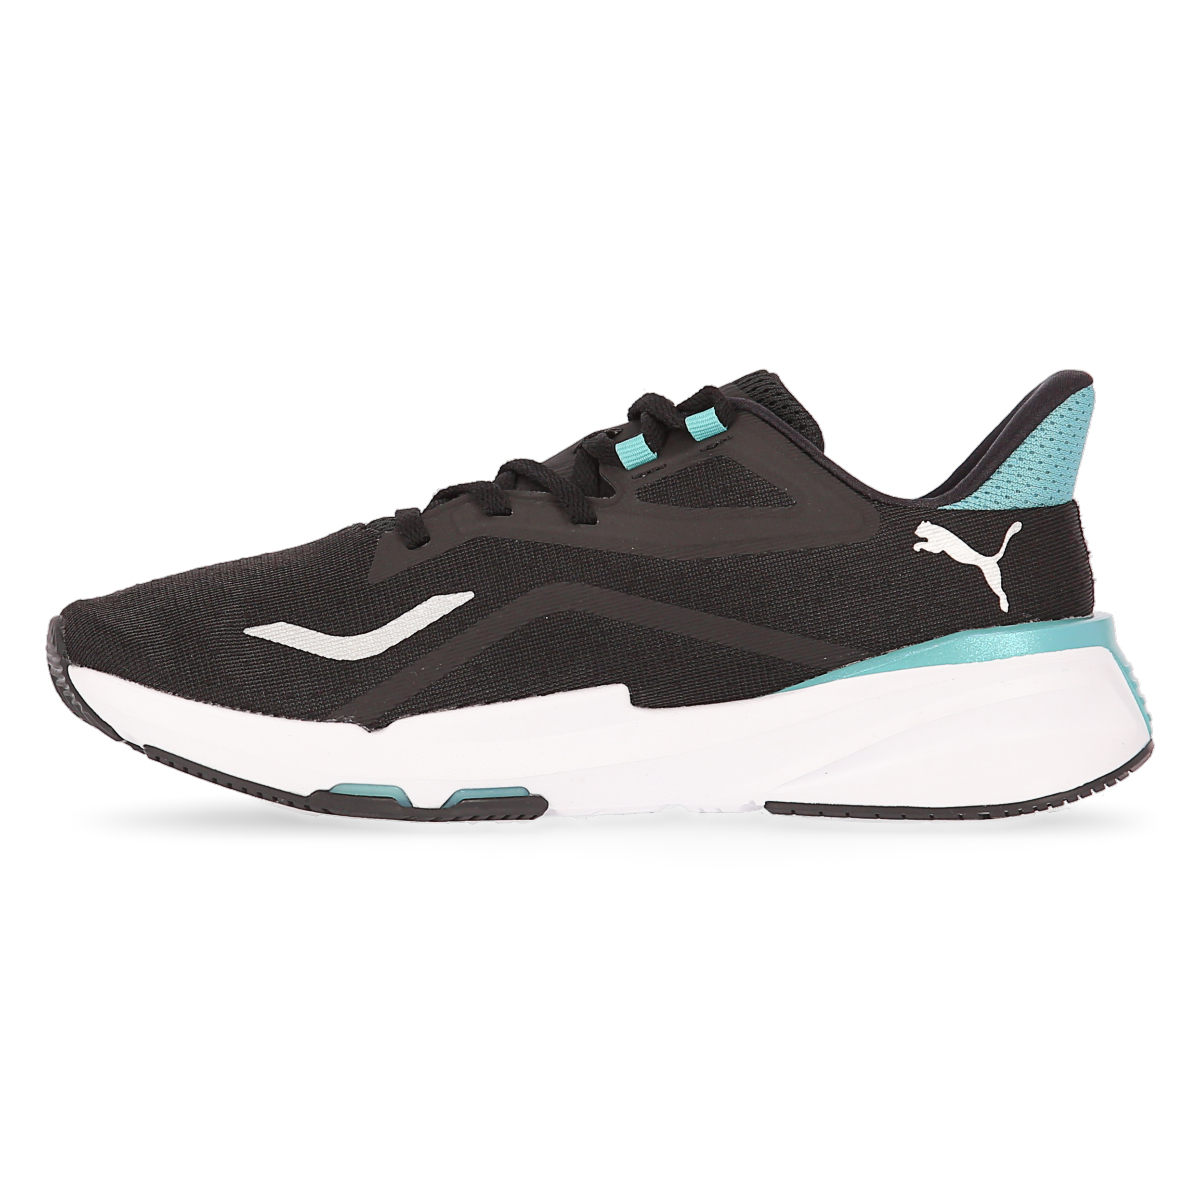 Zapatillas Puma Pwrframe Tr Stardust,  image number null